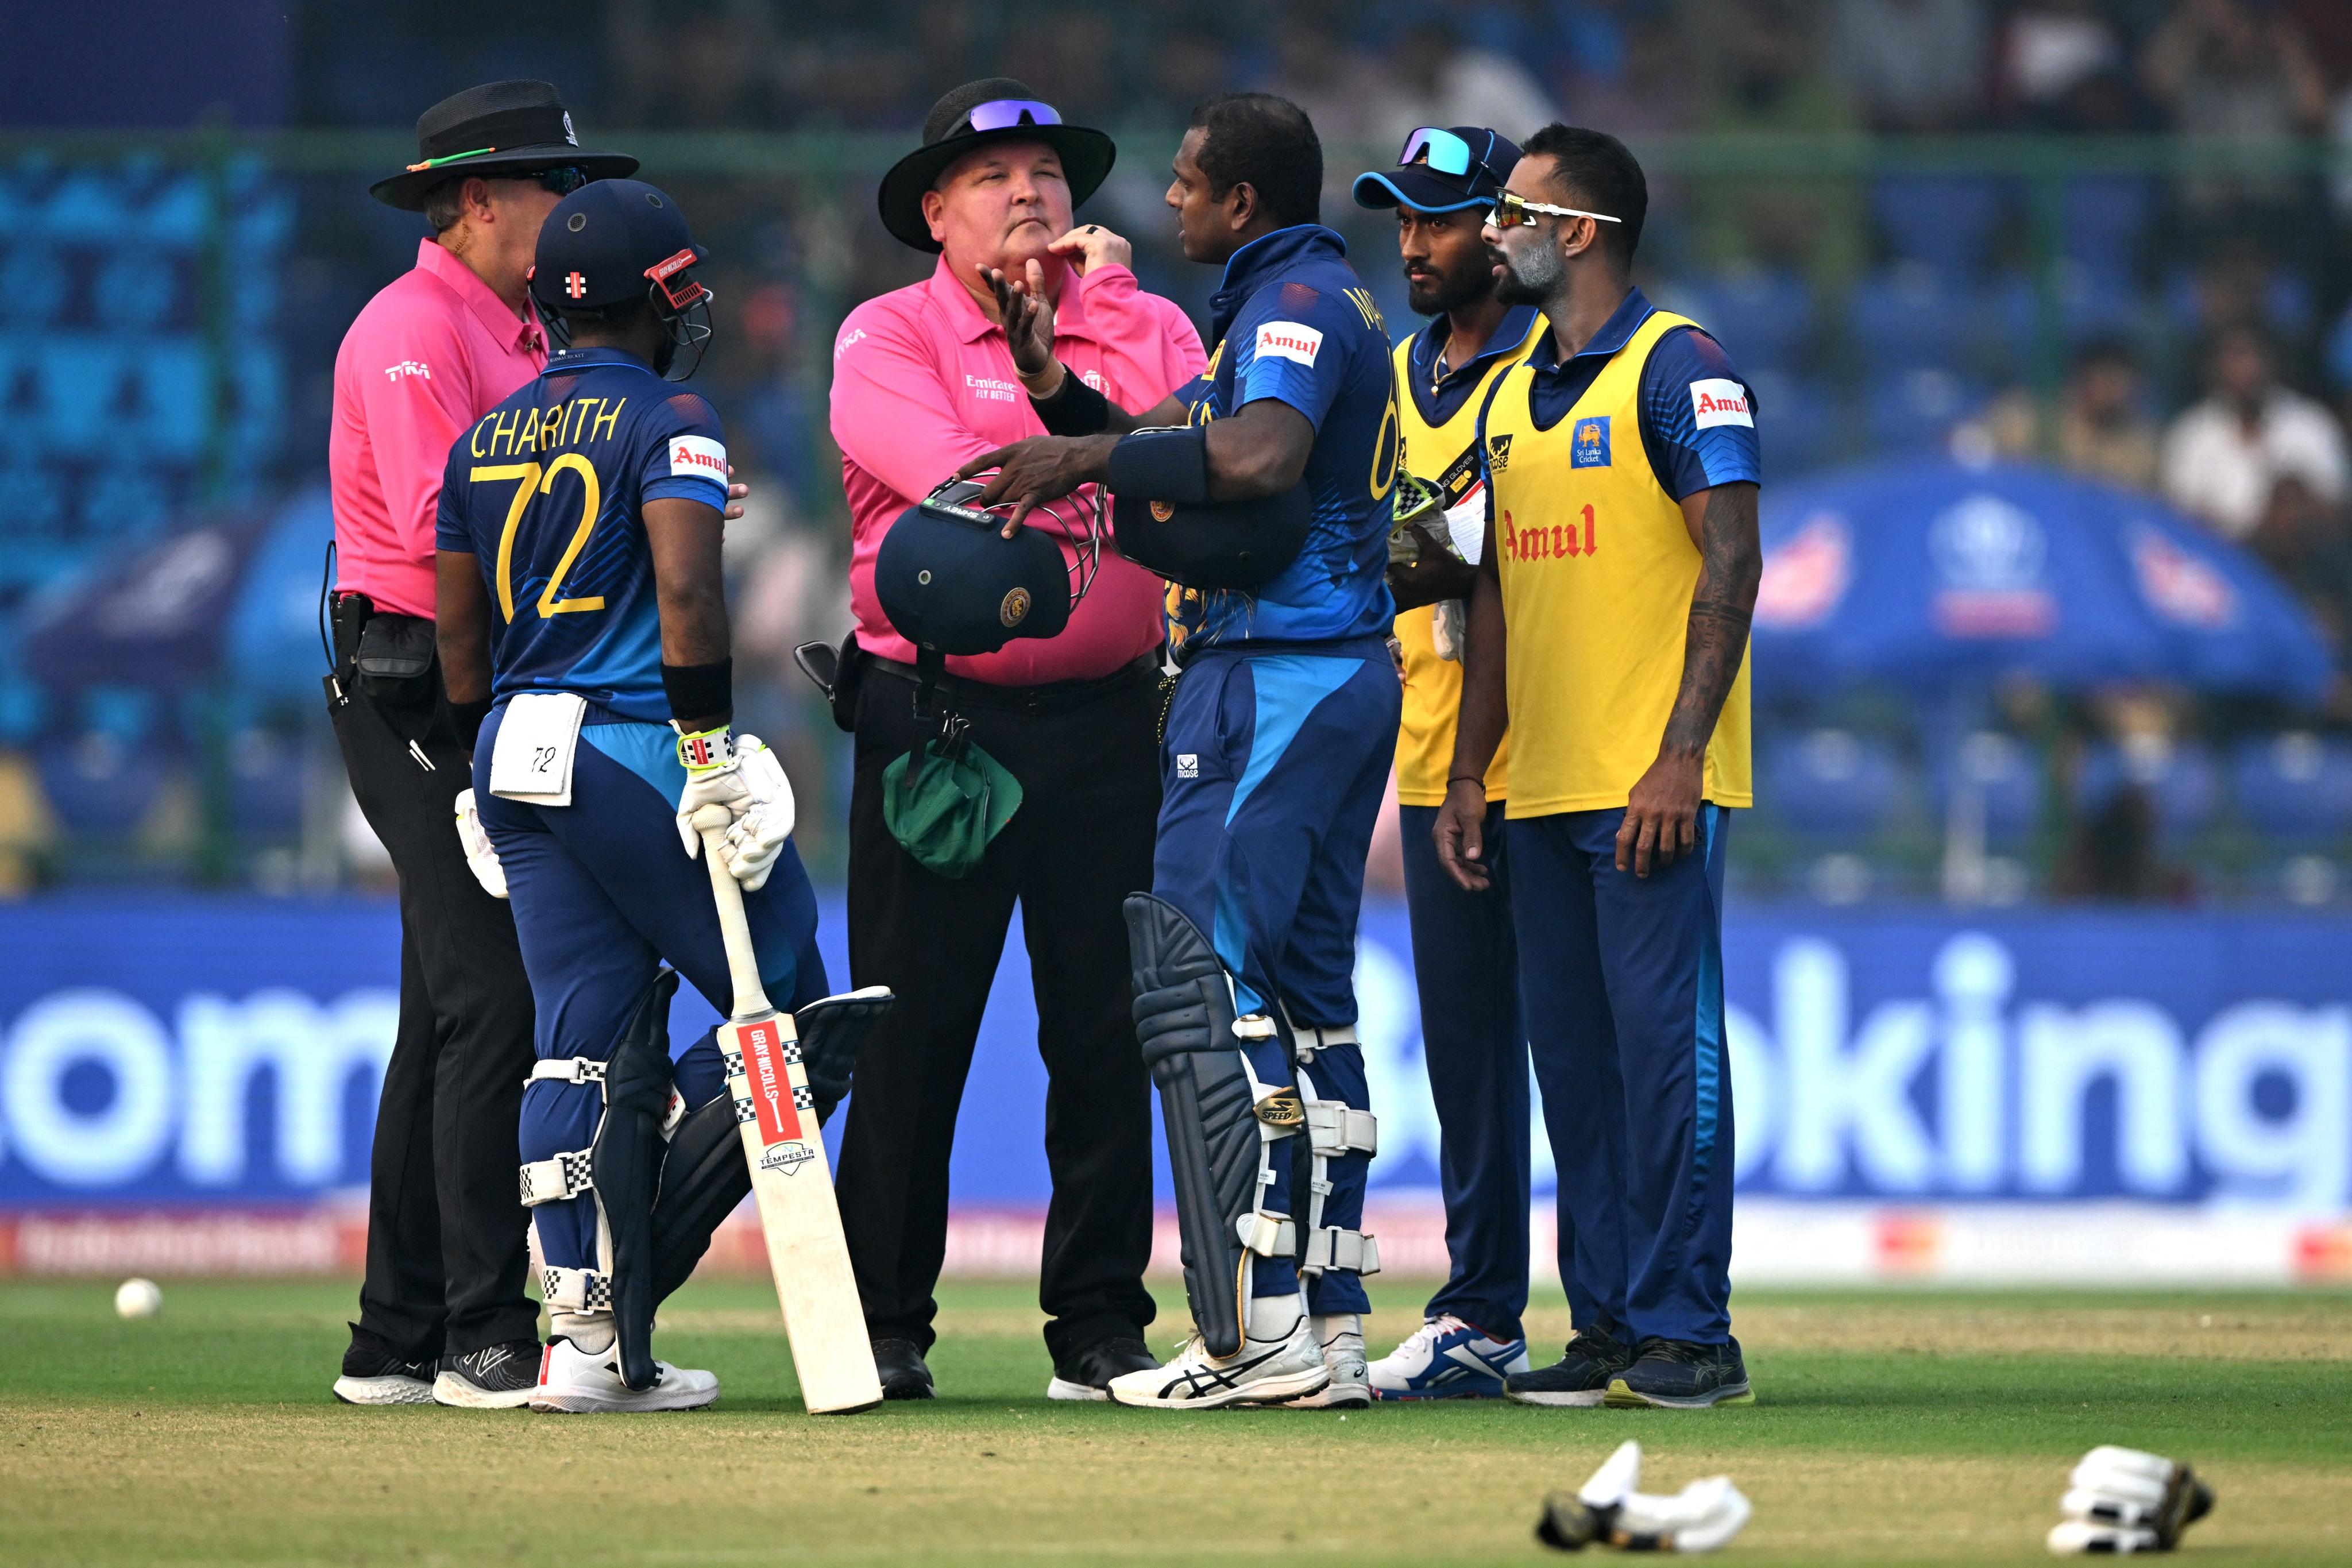 SL vs BAN Time Out Incident